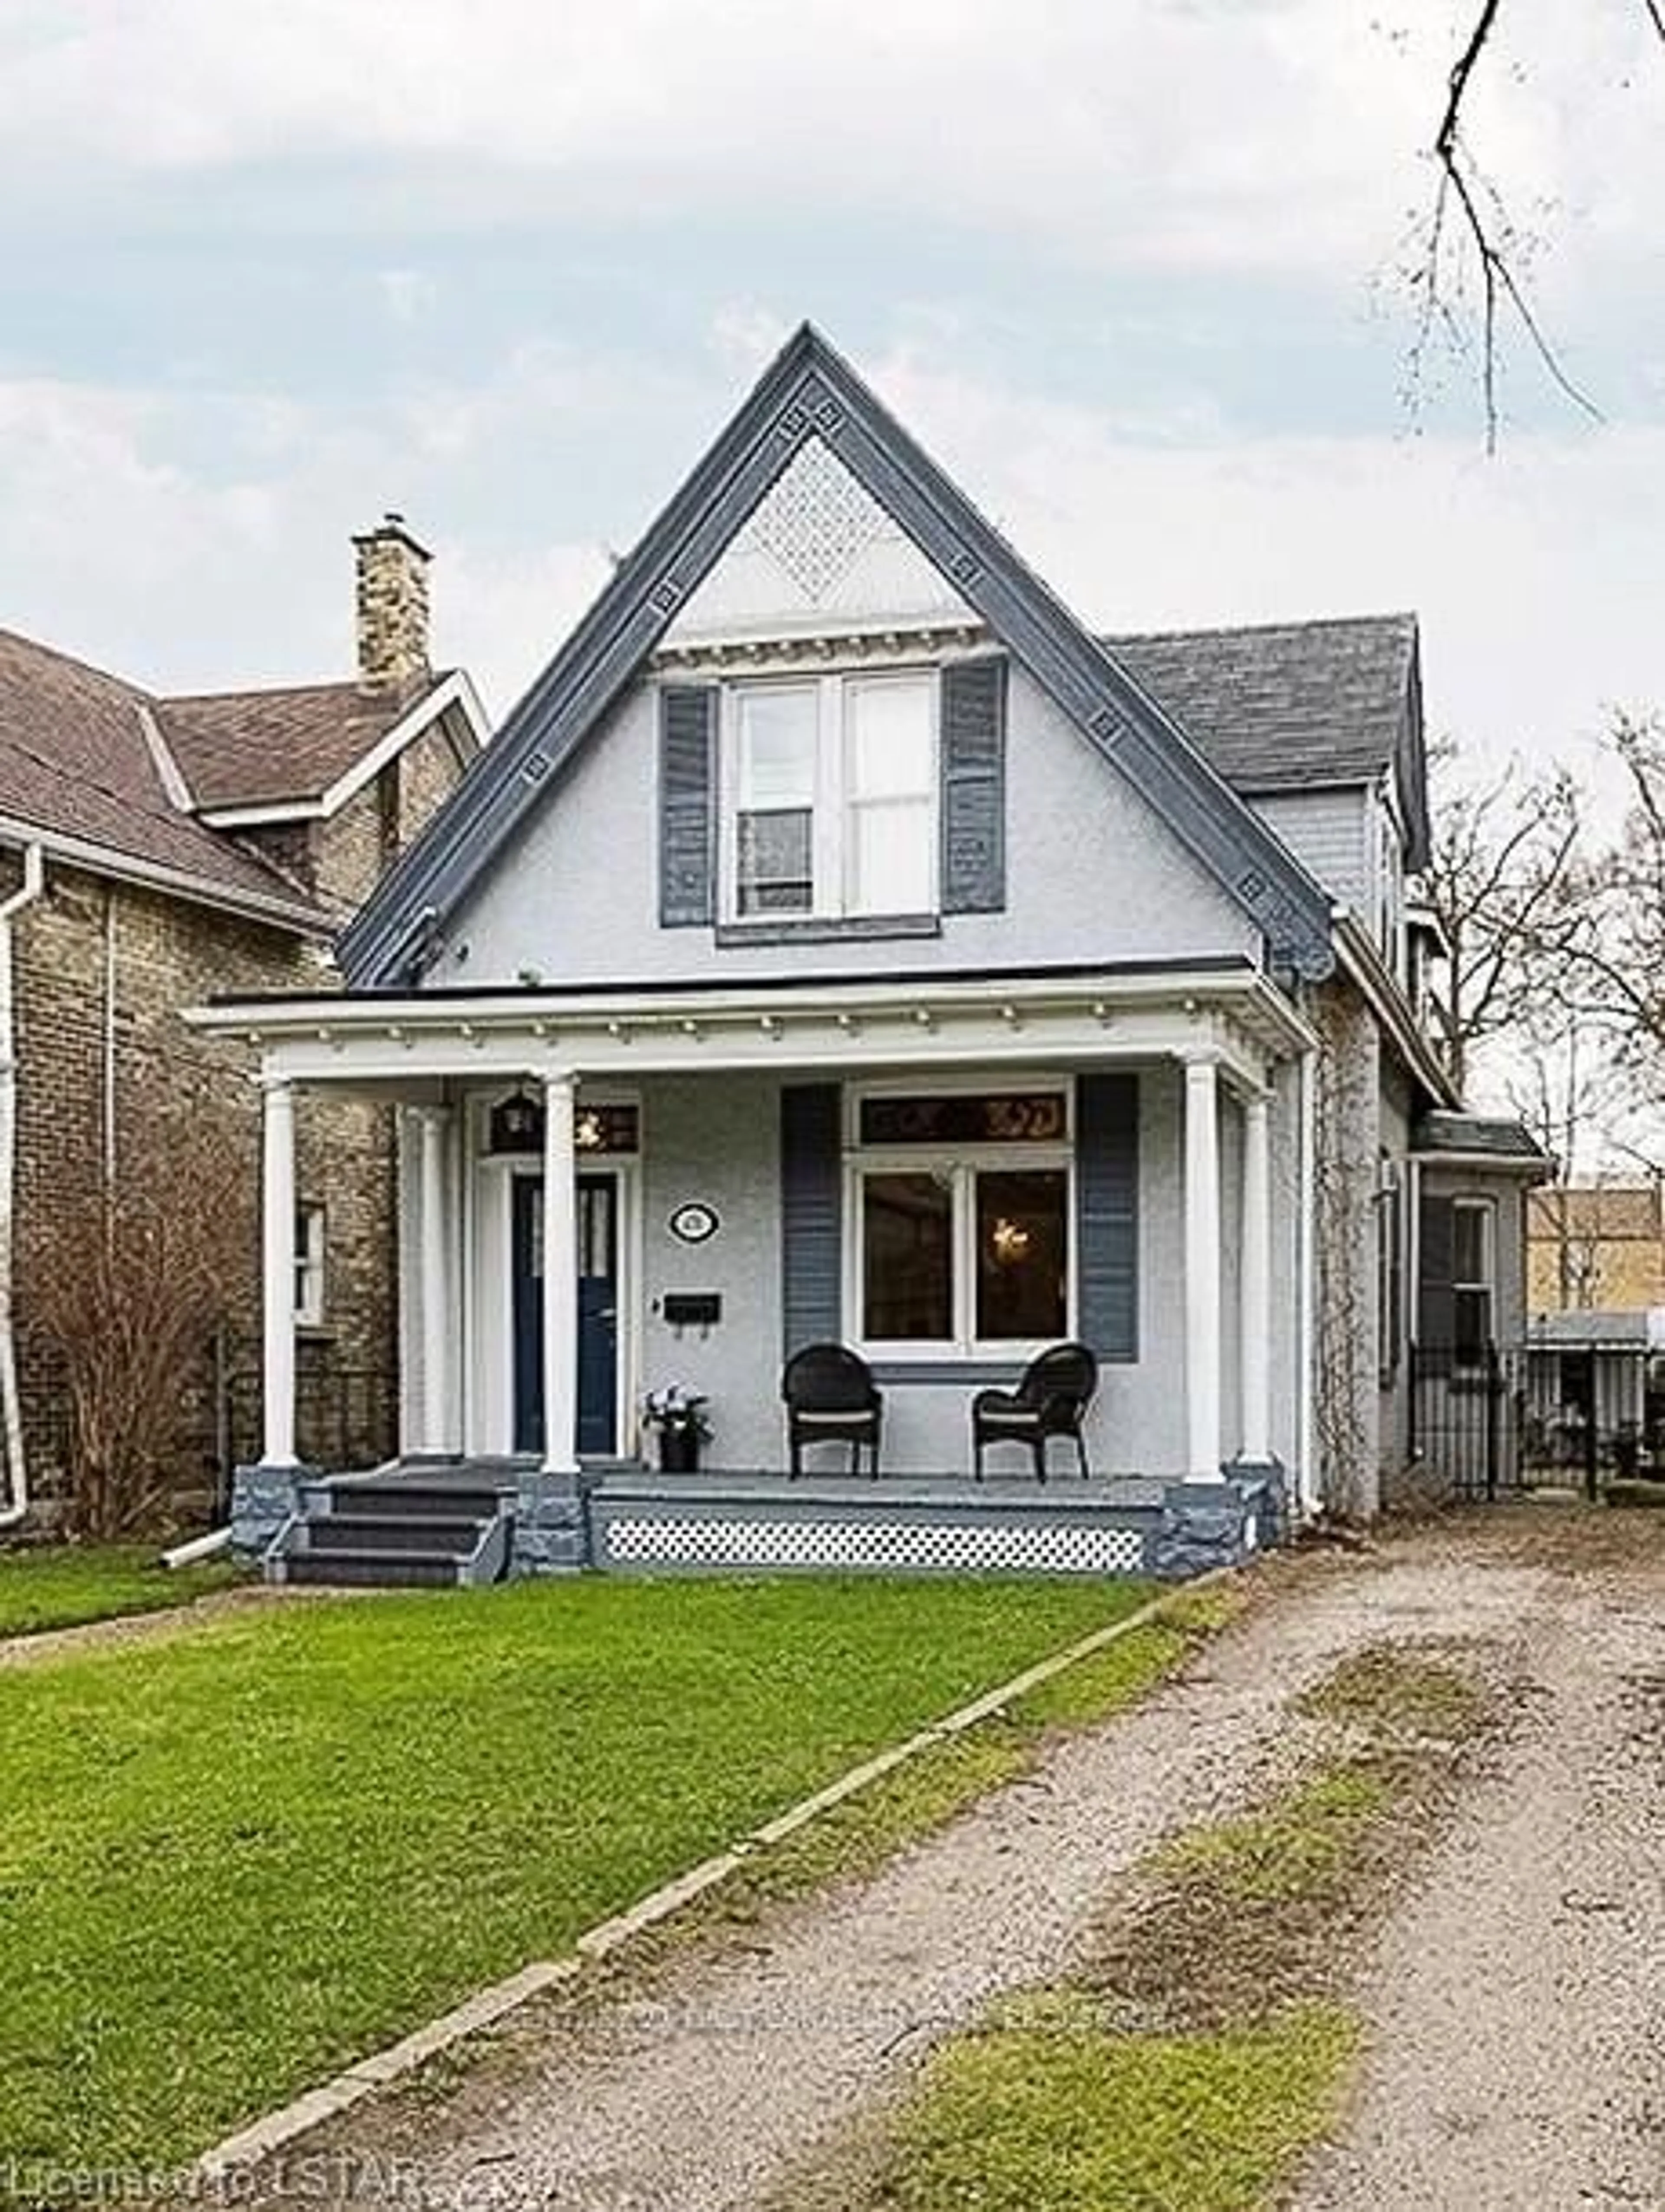 Frontside or backside of a home for 476 Colborne St, London Ontario N6B 2T3